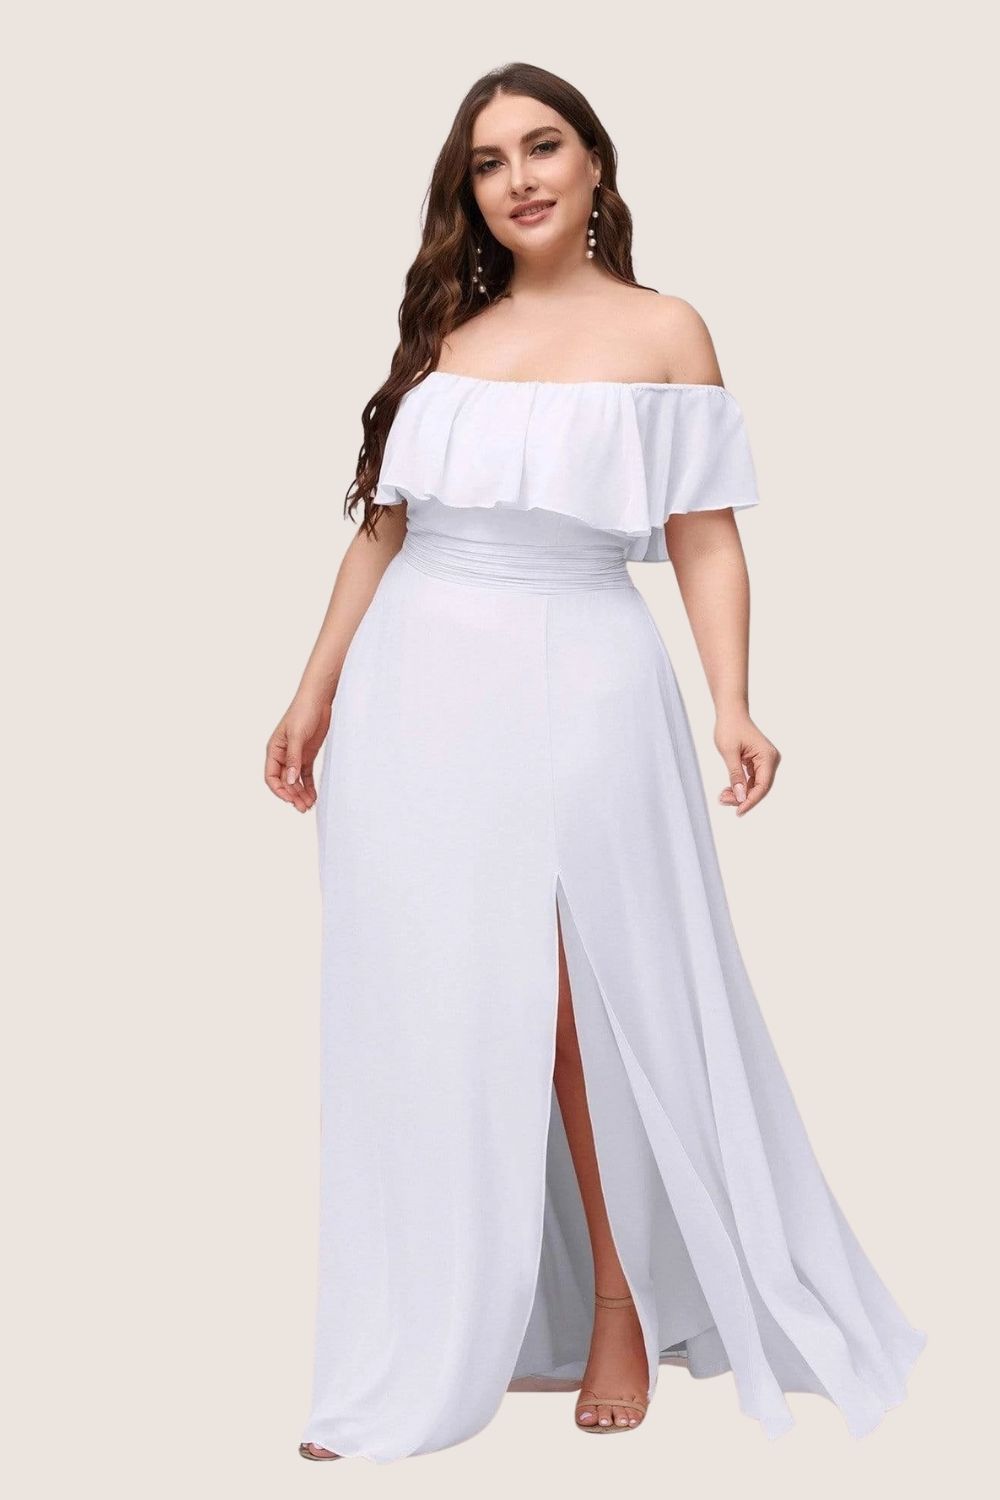 Ivy White Bridesmaid Dress by Dressology